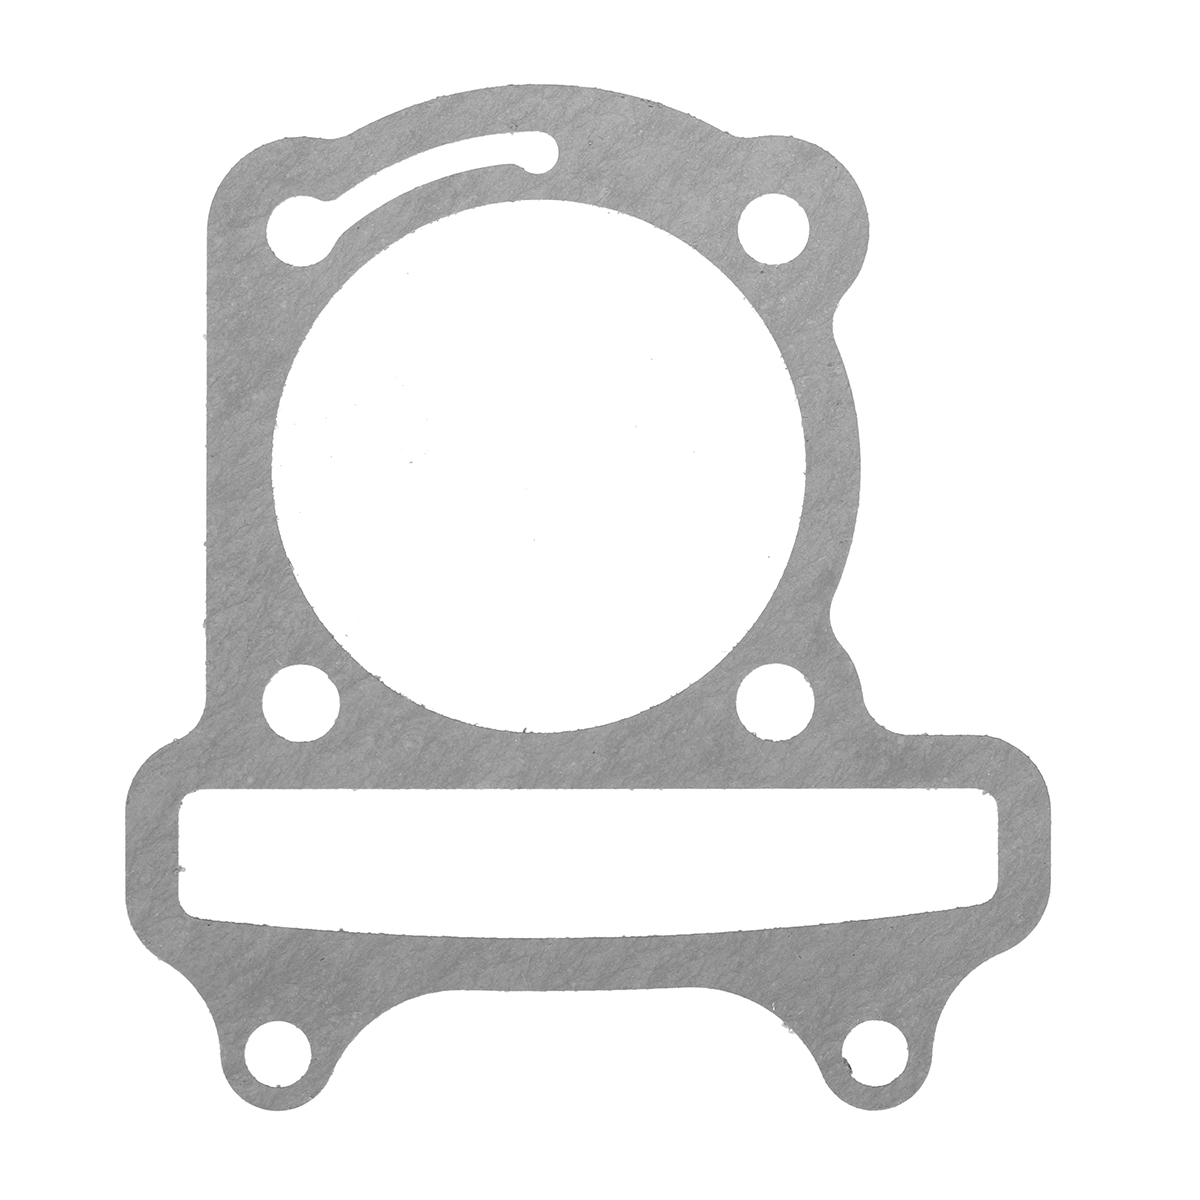 69Mm Big Bore Cylinder Head Rebuild Kit for 139QMB GY6 50Cc 60Cc 100Cc Scooter